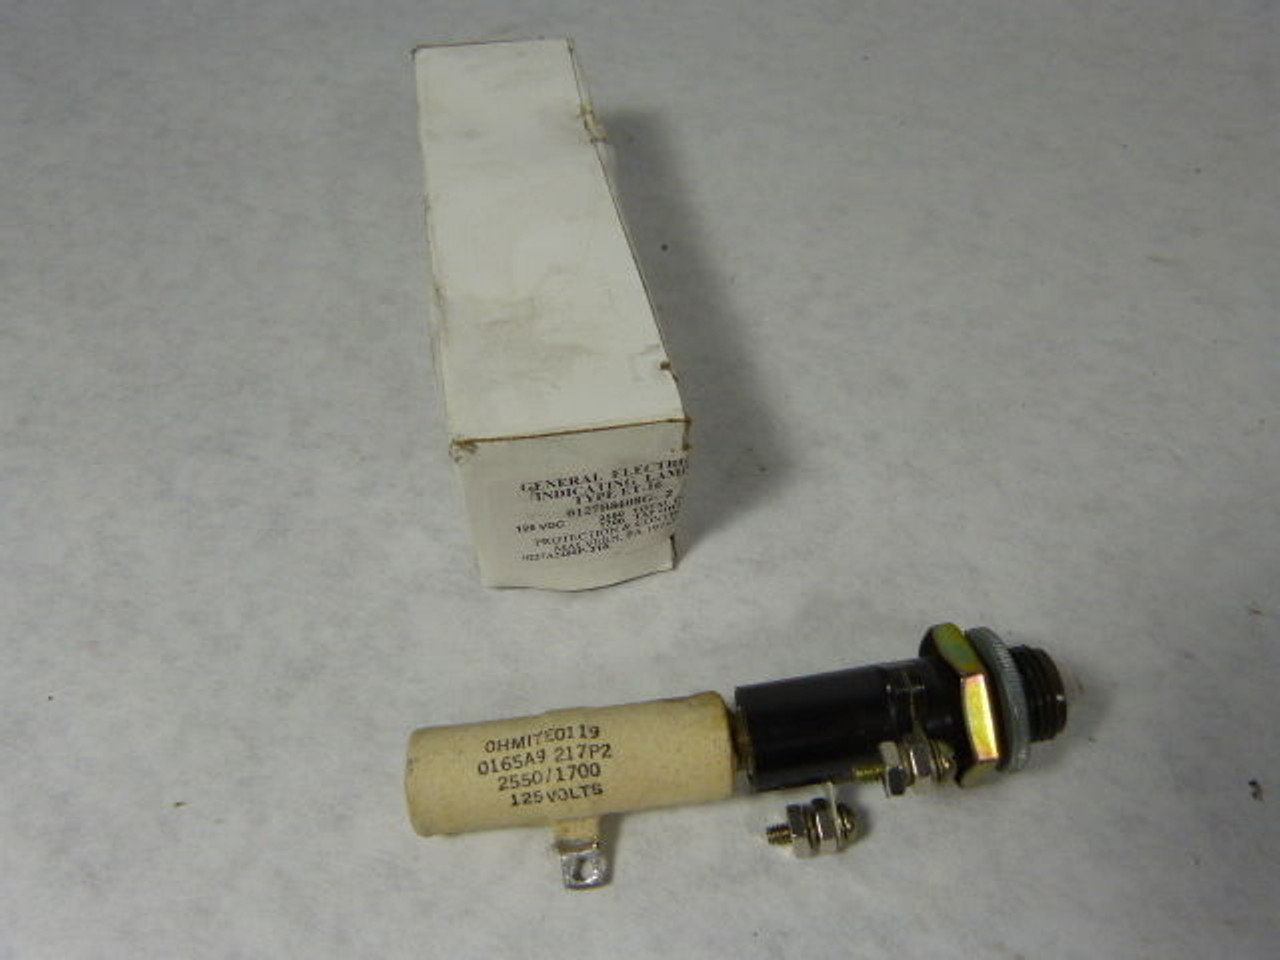 General Electric 0127B8108G-2 Indicator Lamp with Resistor 125VDC 2550Ohms NEW